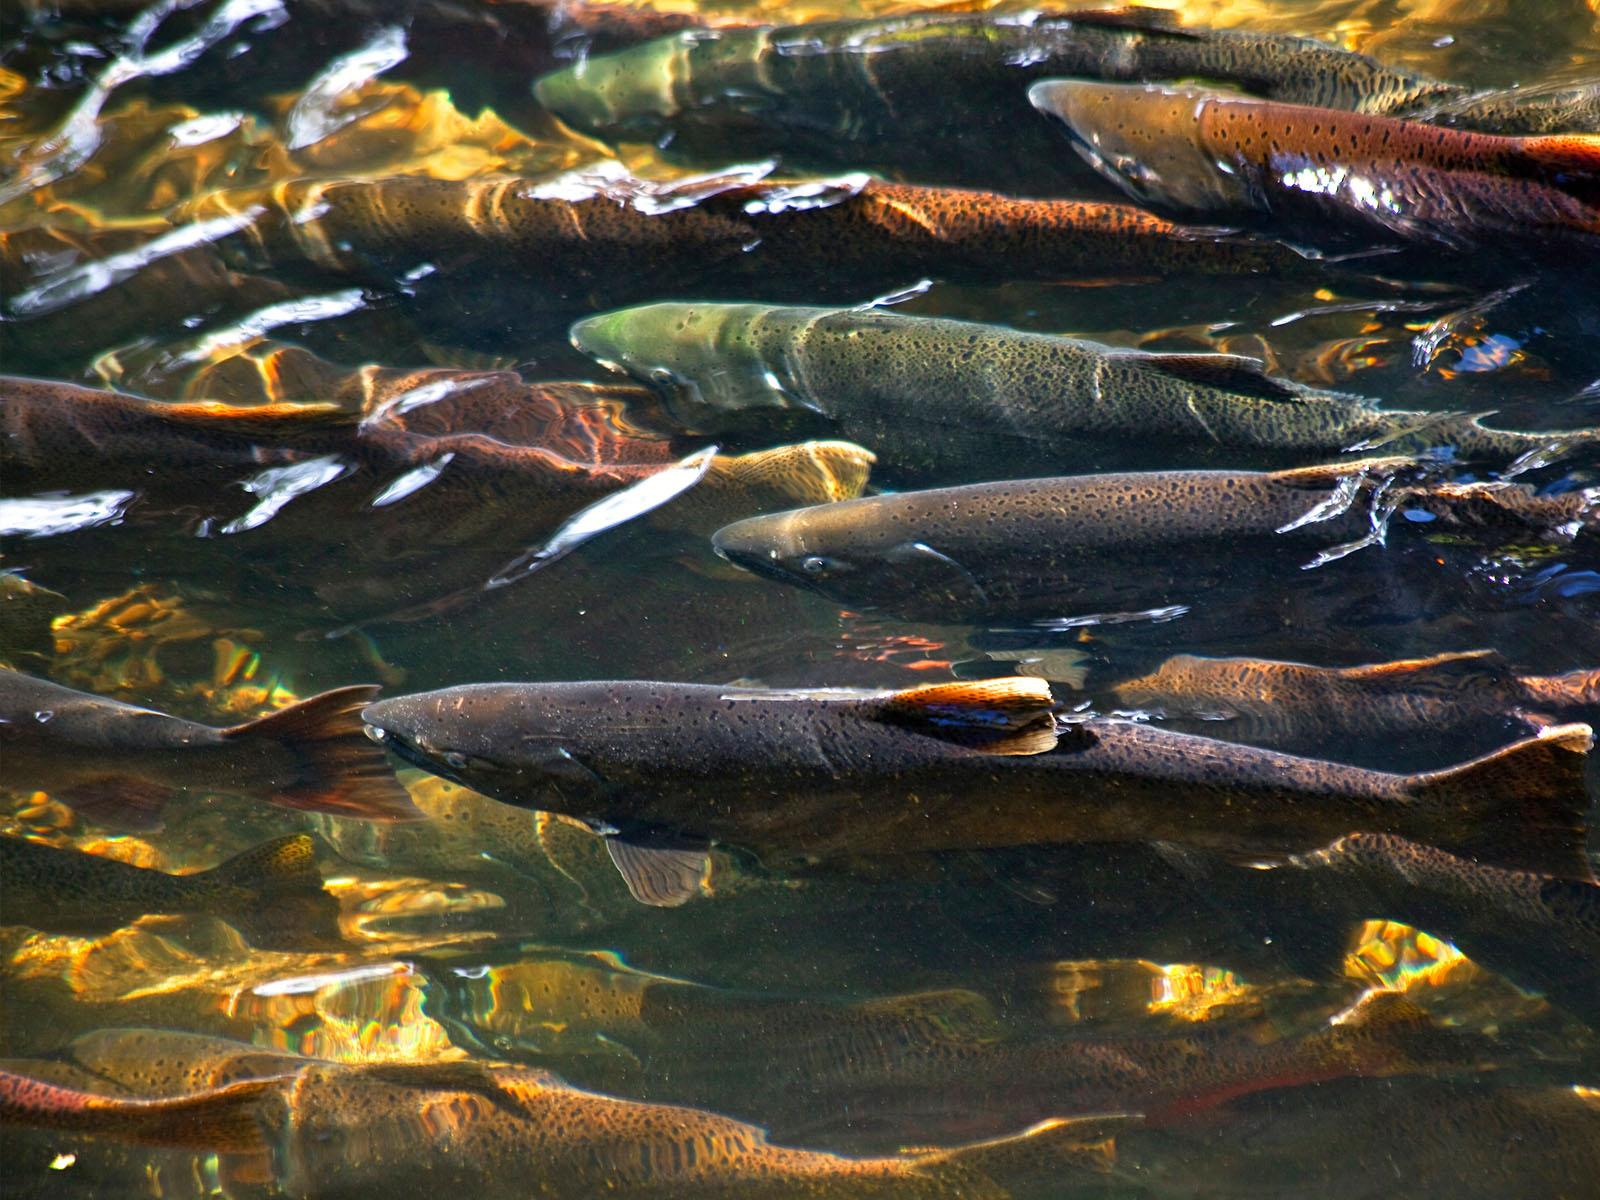 Multiple salmon swim tightly packed alongside one another in Issaquah Creek, Washington.